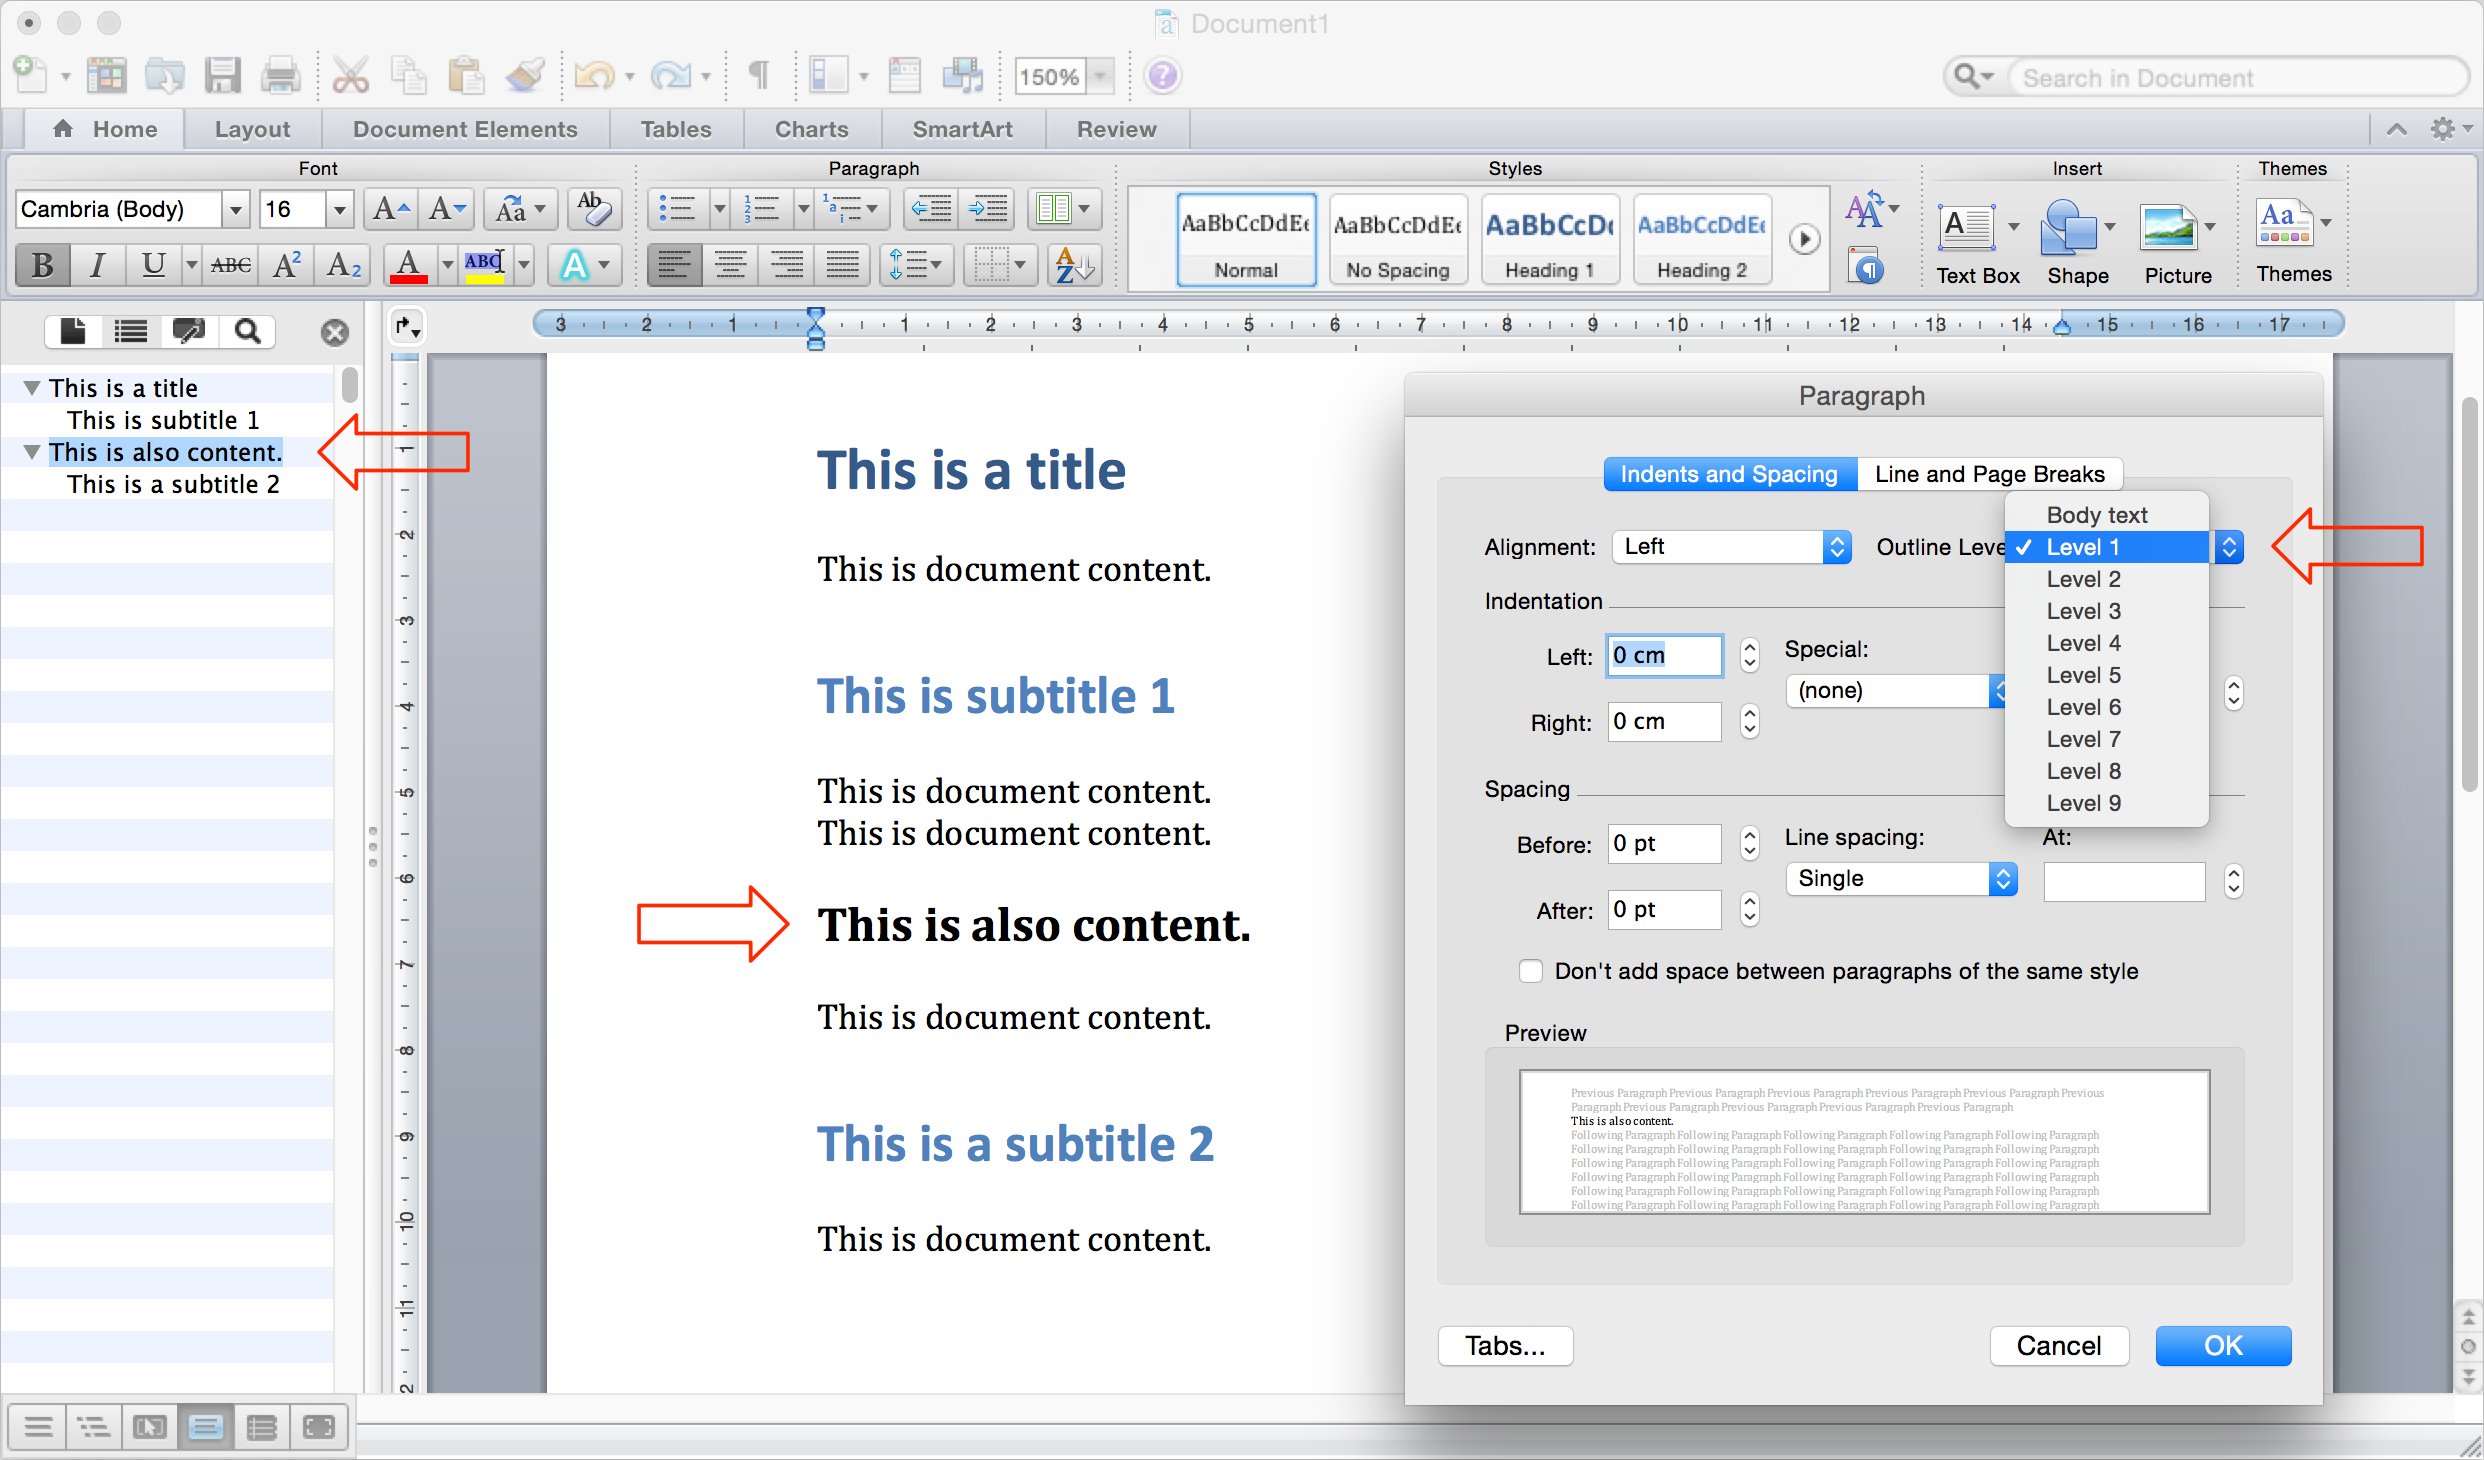 how do yhou clear formatting in word for mac 2011